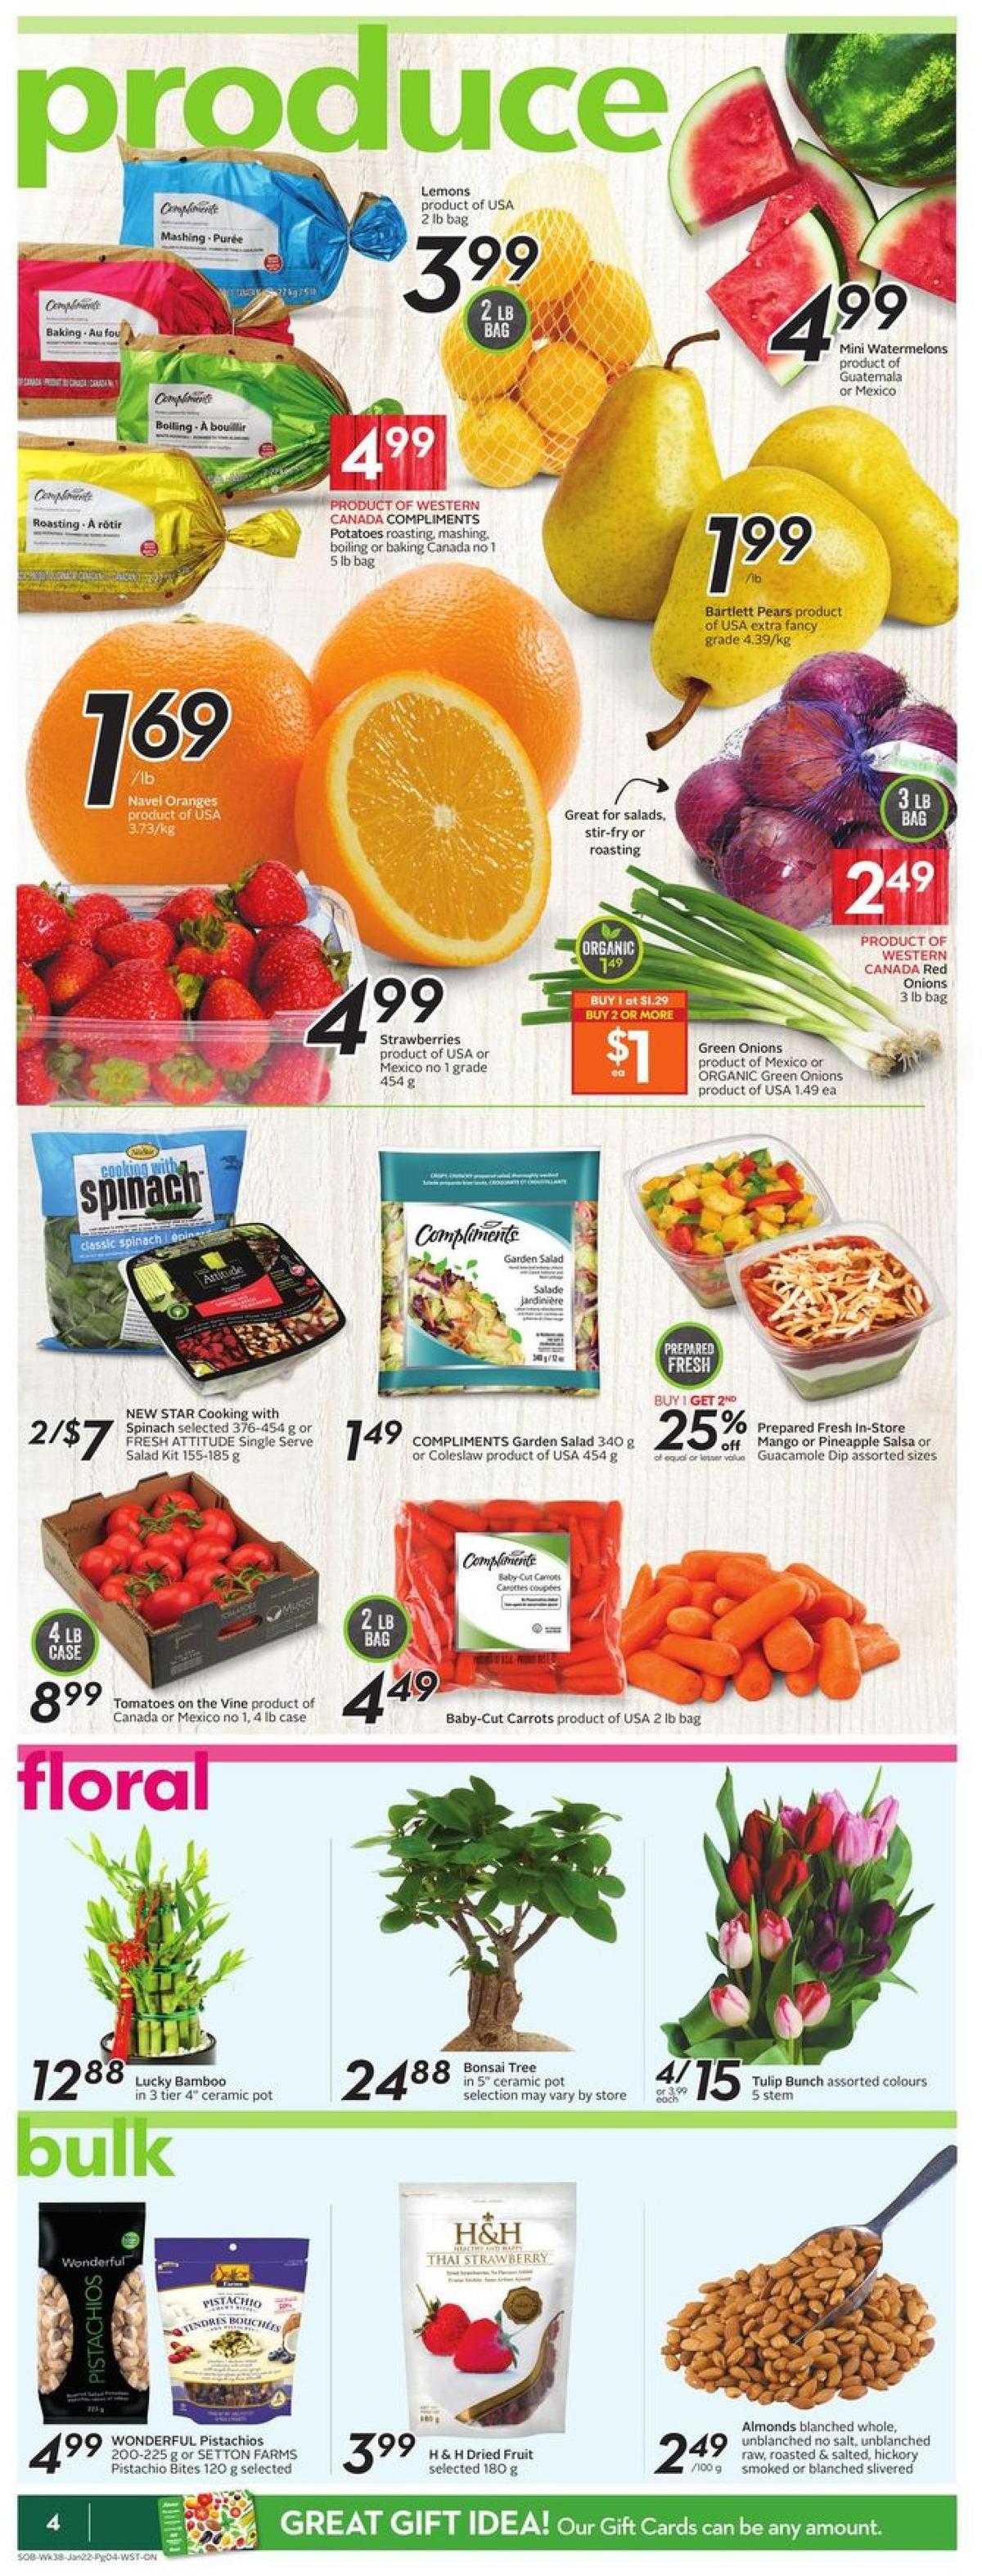 Safeway Flyer from January 16